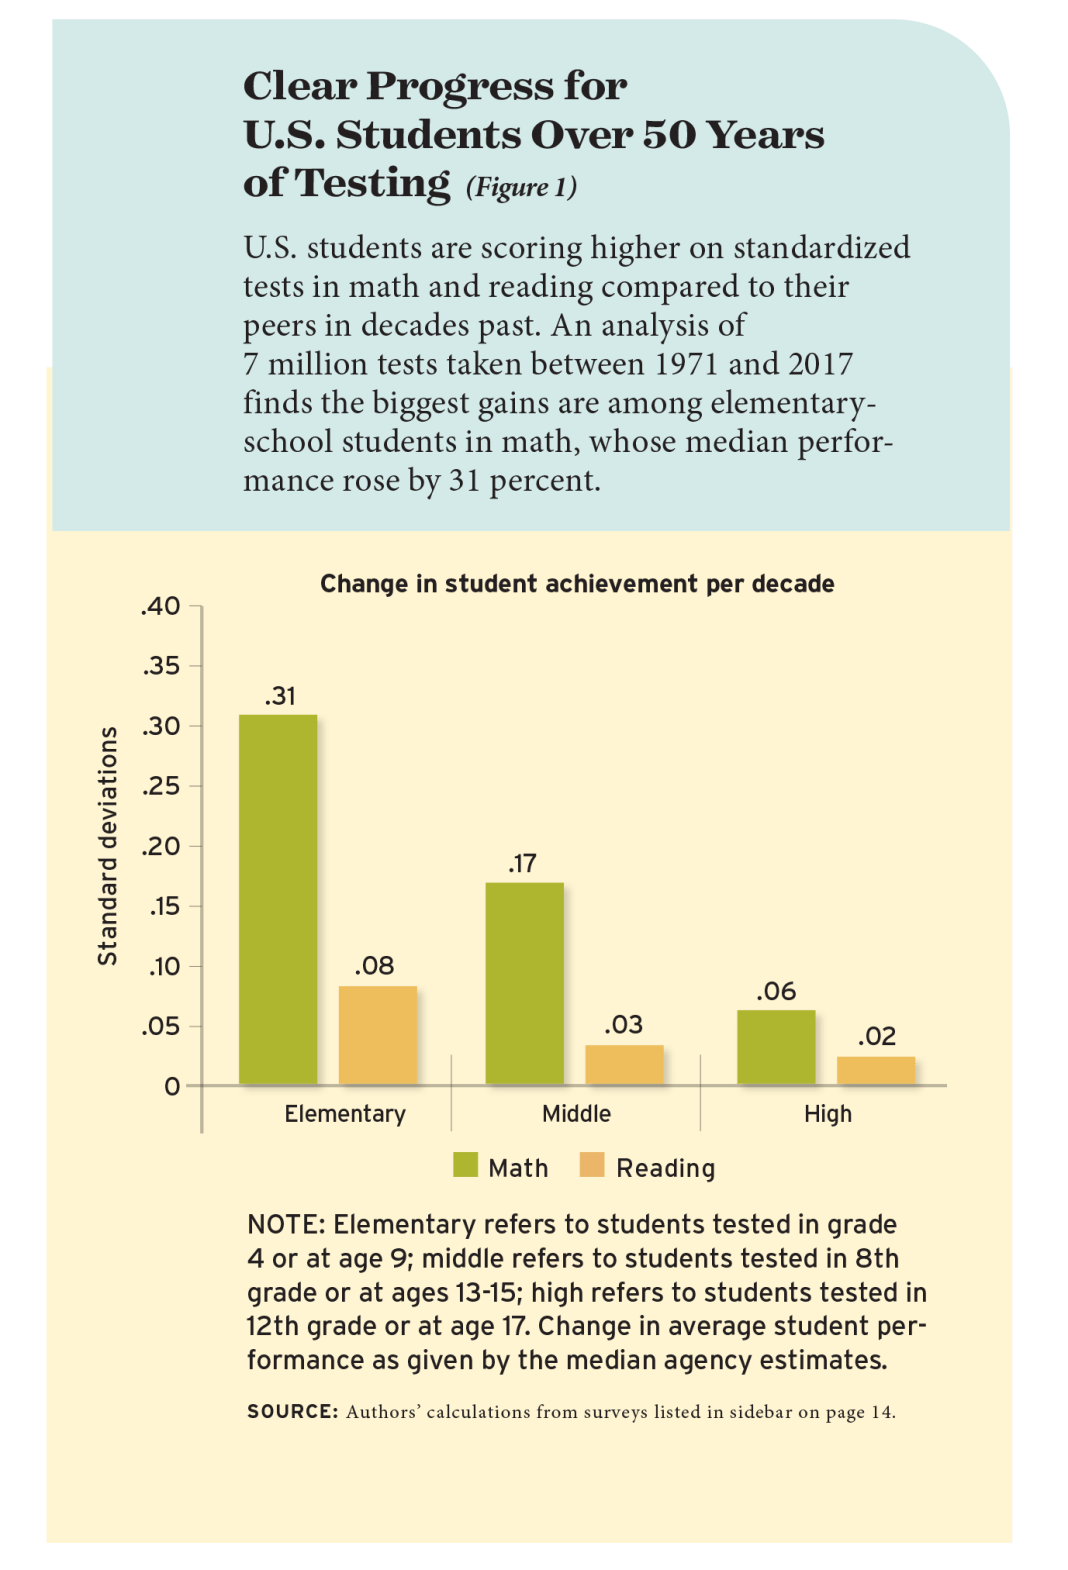 Clear Progress for U.S. Students Over 50 Years of Testing (Figure 1)